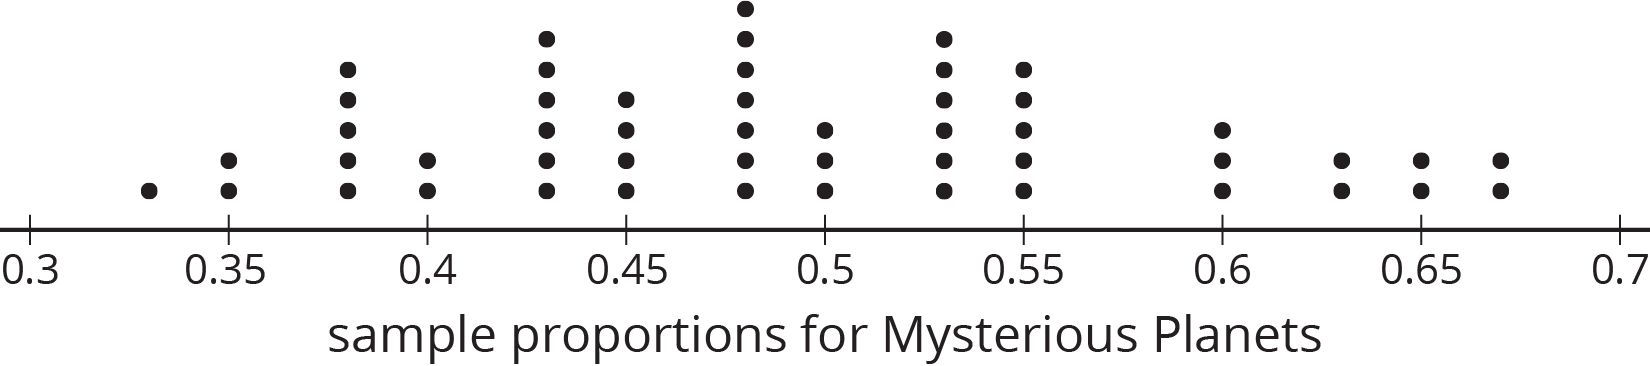 A dot plot for “sample proportions for Mysterious Planets” with the numbers 0 point 3 through 0 point 7, in increments of 0 point 5, indicated. The data are as follows:  0 point 3 3, 1 dot. 0 point 3 5, 2 dots. 0 point 3 8, 5 dots. 0 point 4, 2 dots. 0 point 4 3, 6 dots. 0 point 4 5, 4 dots. 0 point 4 8, 7 dots. 0 point 5, 3 dots. 0 point 5 3, 6 dots. 0 point 5 5, 5 dots. 0 point 6, 3 dots. 0 point 6 3, 2 dots. 0 point 6 5, 2 dots. 0 point 6 7, 2 dots.